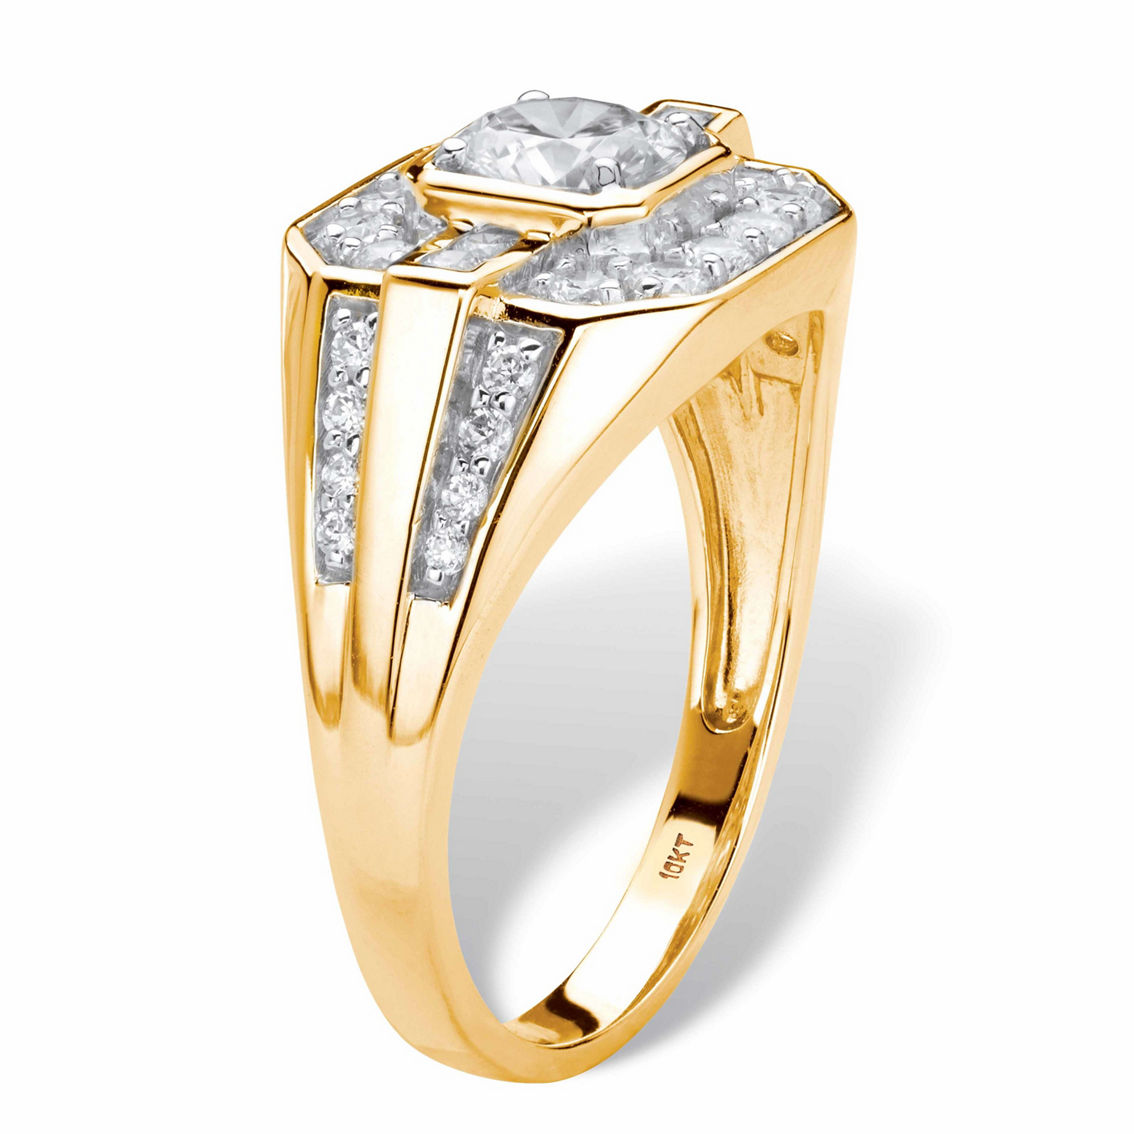 PalmBeach Men's 1.58 Cttw. Solid 10k Gold Round Cubic Zirconia Octagon-Shaped Ring - Image 2 of 5